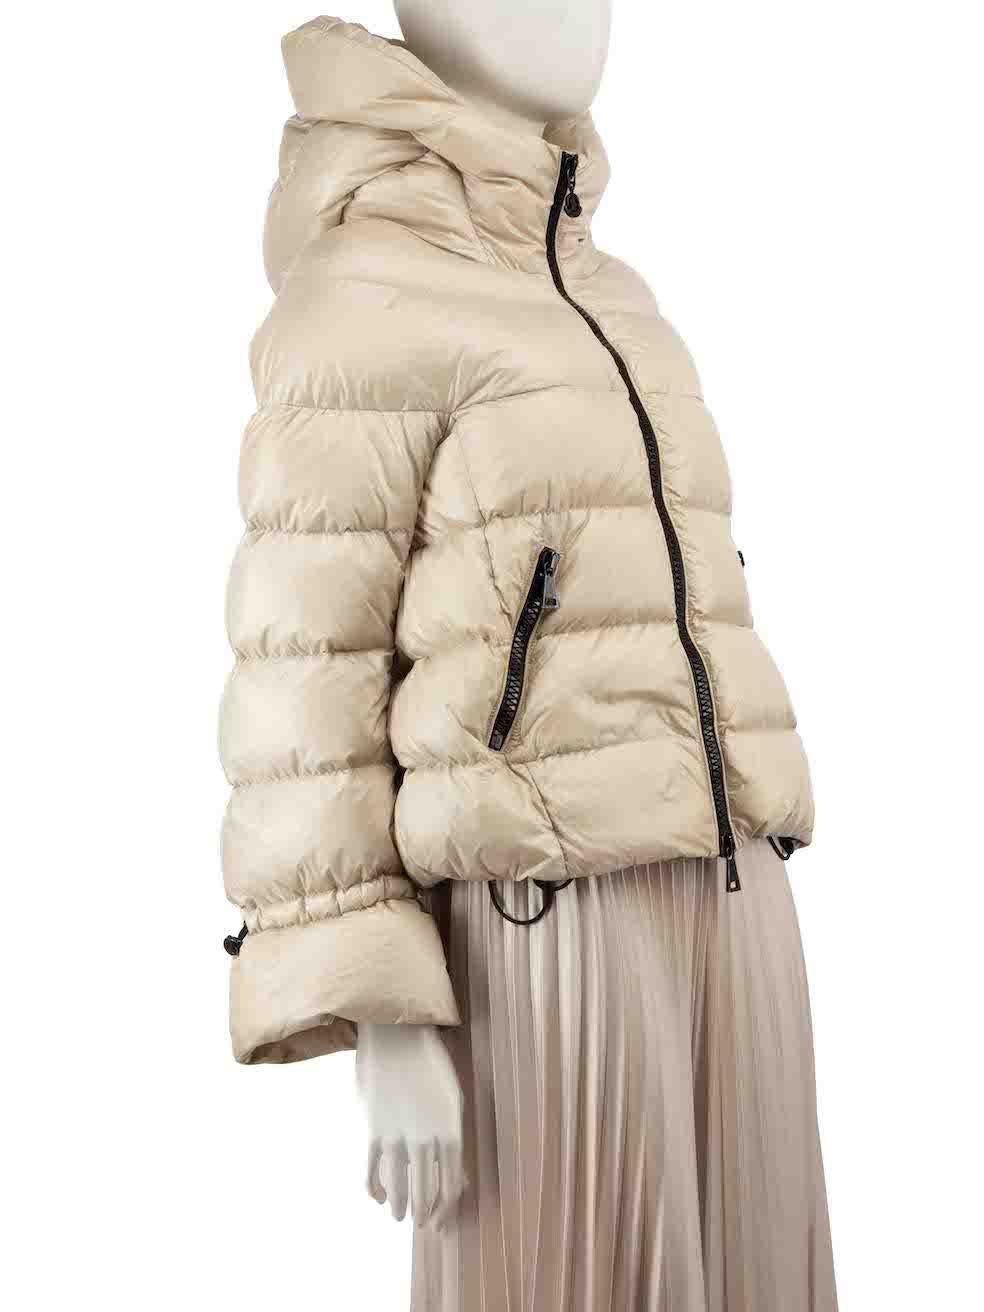 CONDITION is Very good. Minimal wear to coat is evident. Light tarnishing to the zip pullers and slight discolouration to the cuff edges, back neck and left side near hem on this used Moncler designer resale item.
 
 
 
 Details
 
 
 Beige
 
